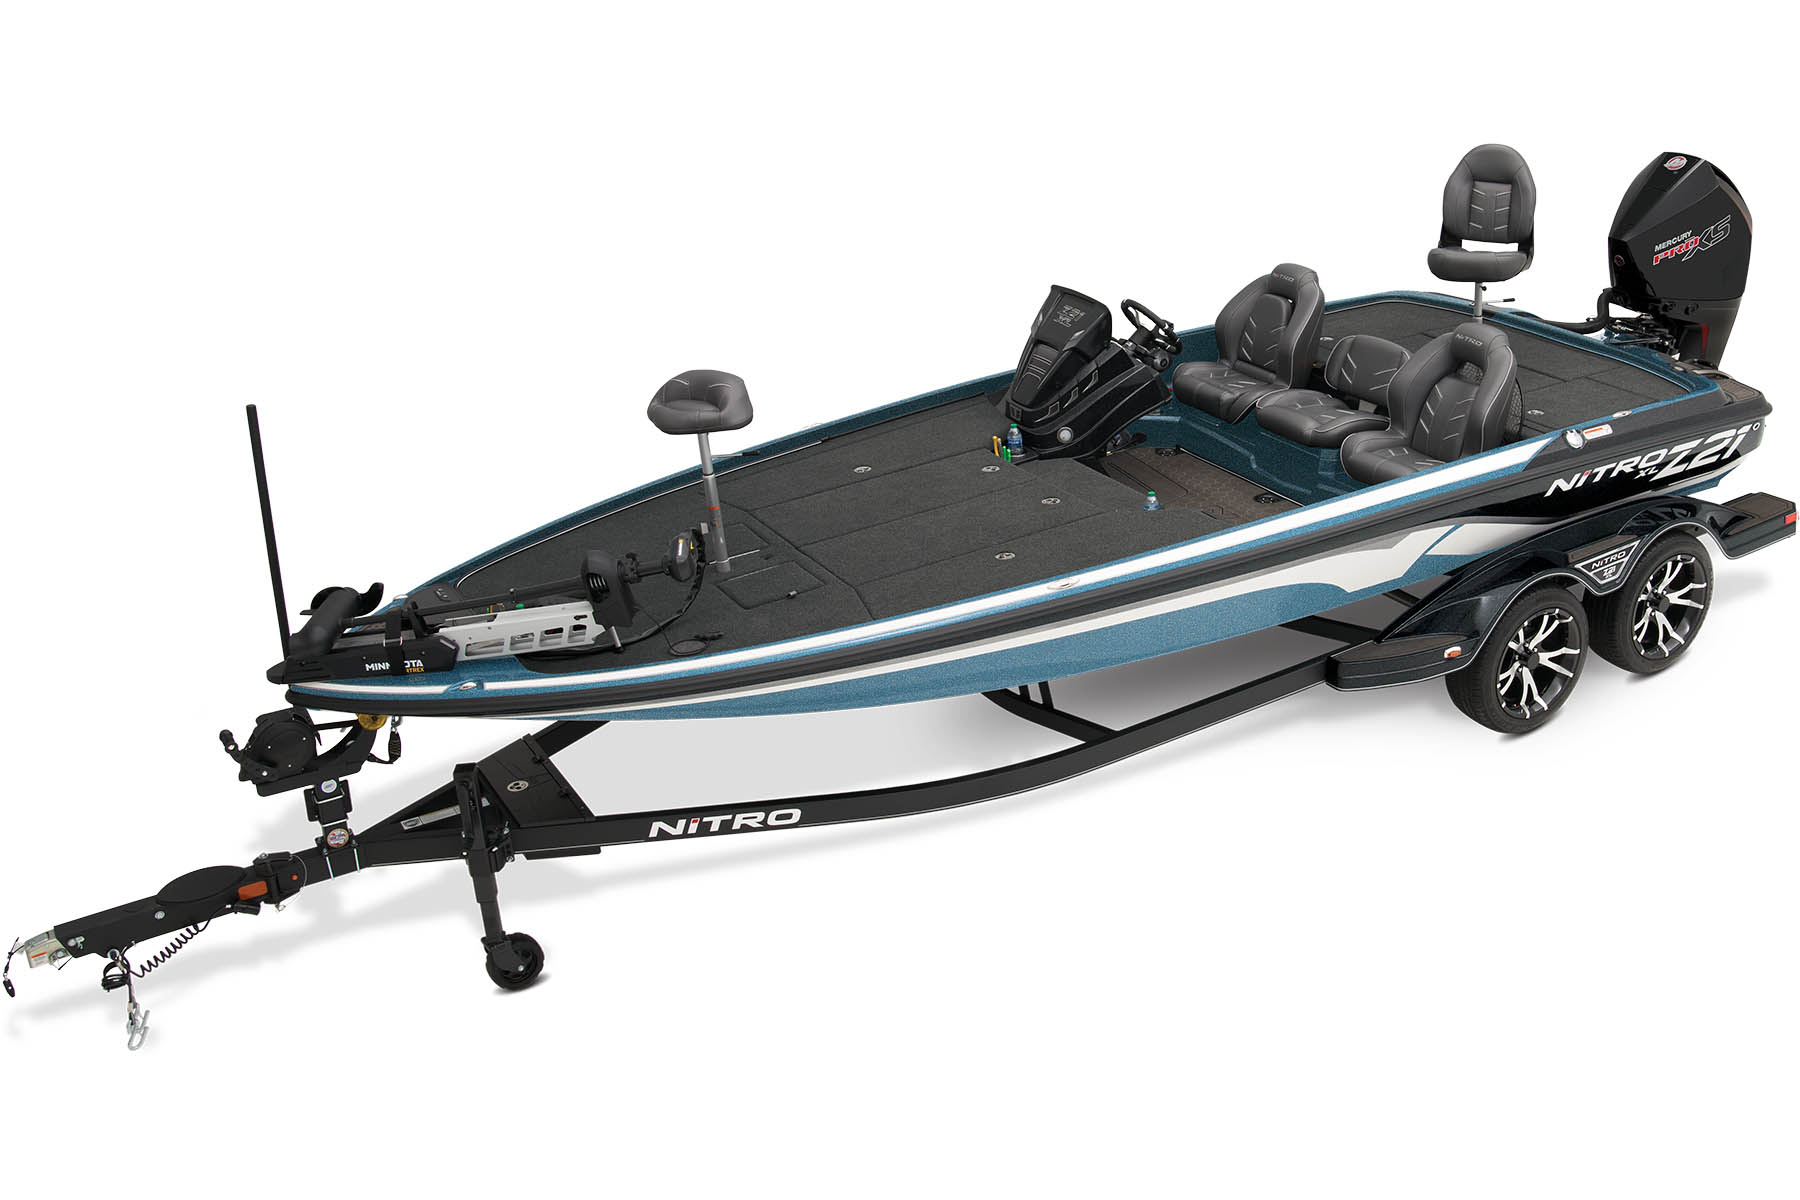 Buy Bass Pro 30 Remote Control Fishing Boat Online at